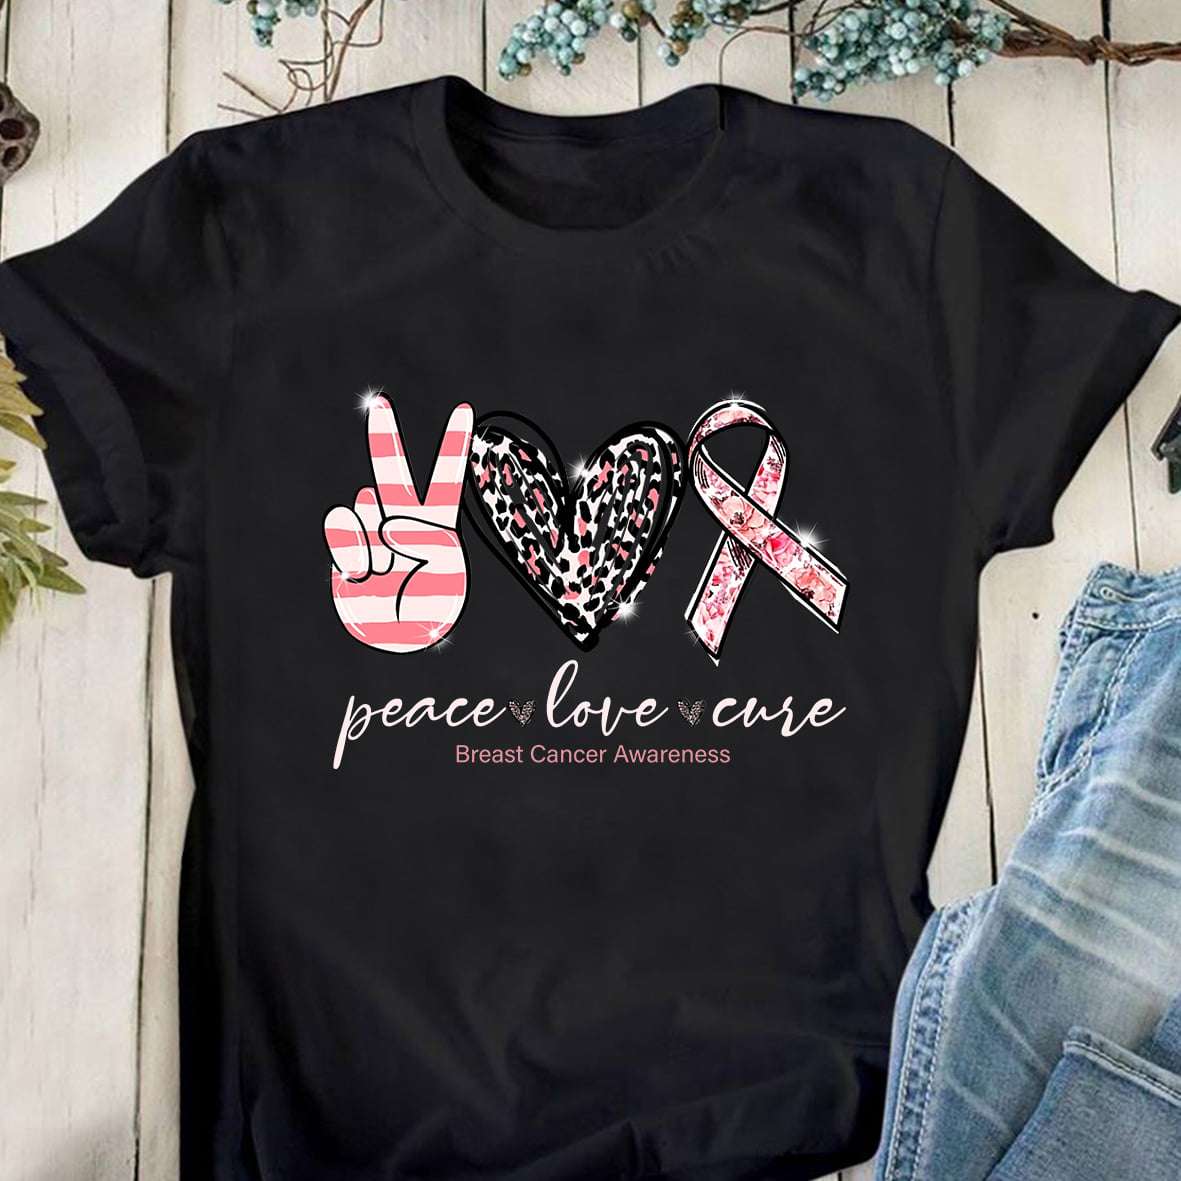 Peace love cure - Breast cancer awareness, Breast cancer ribbon